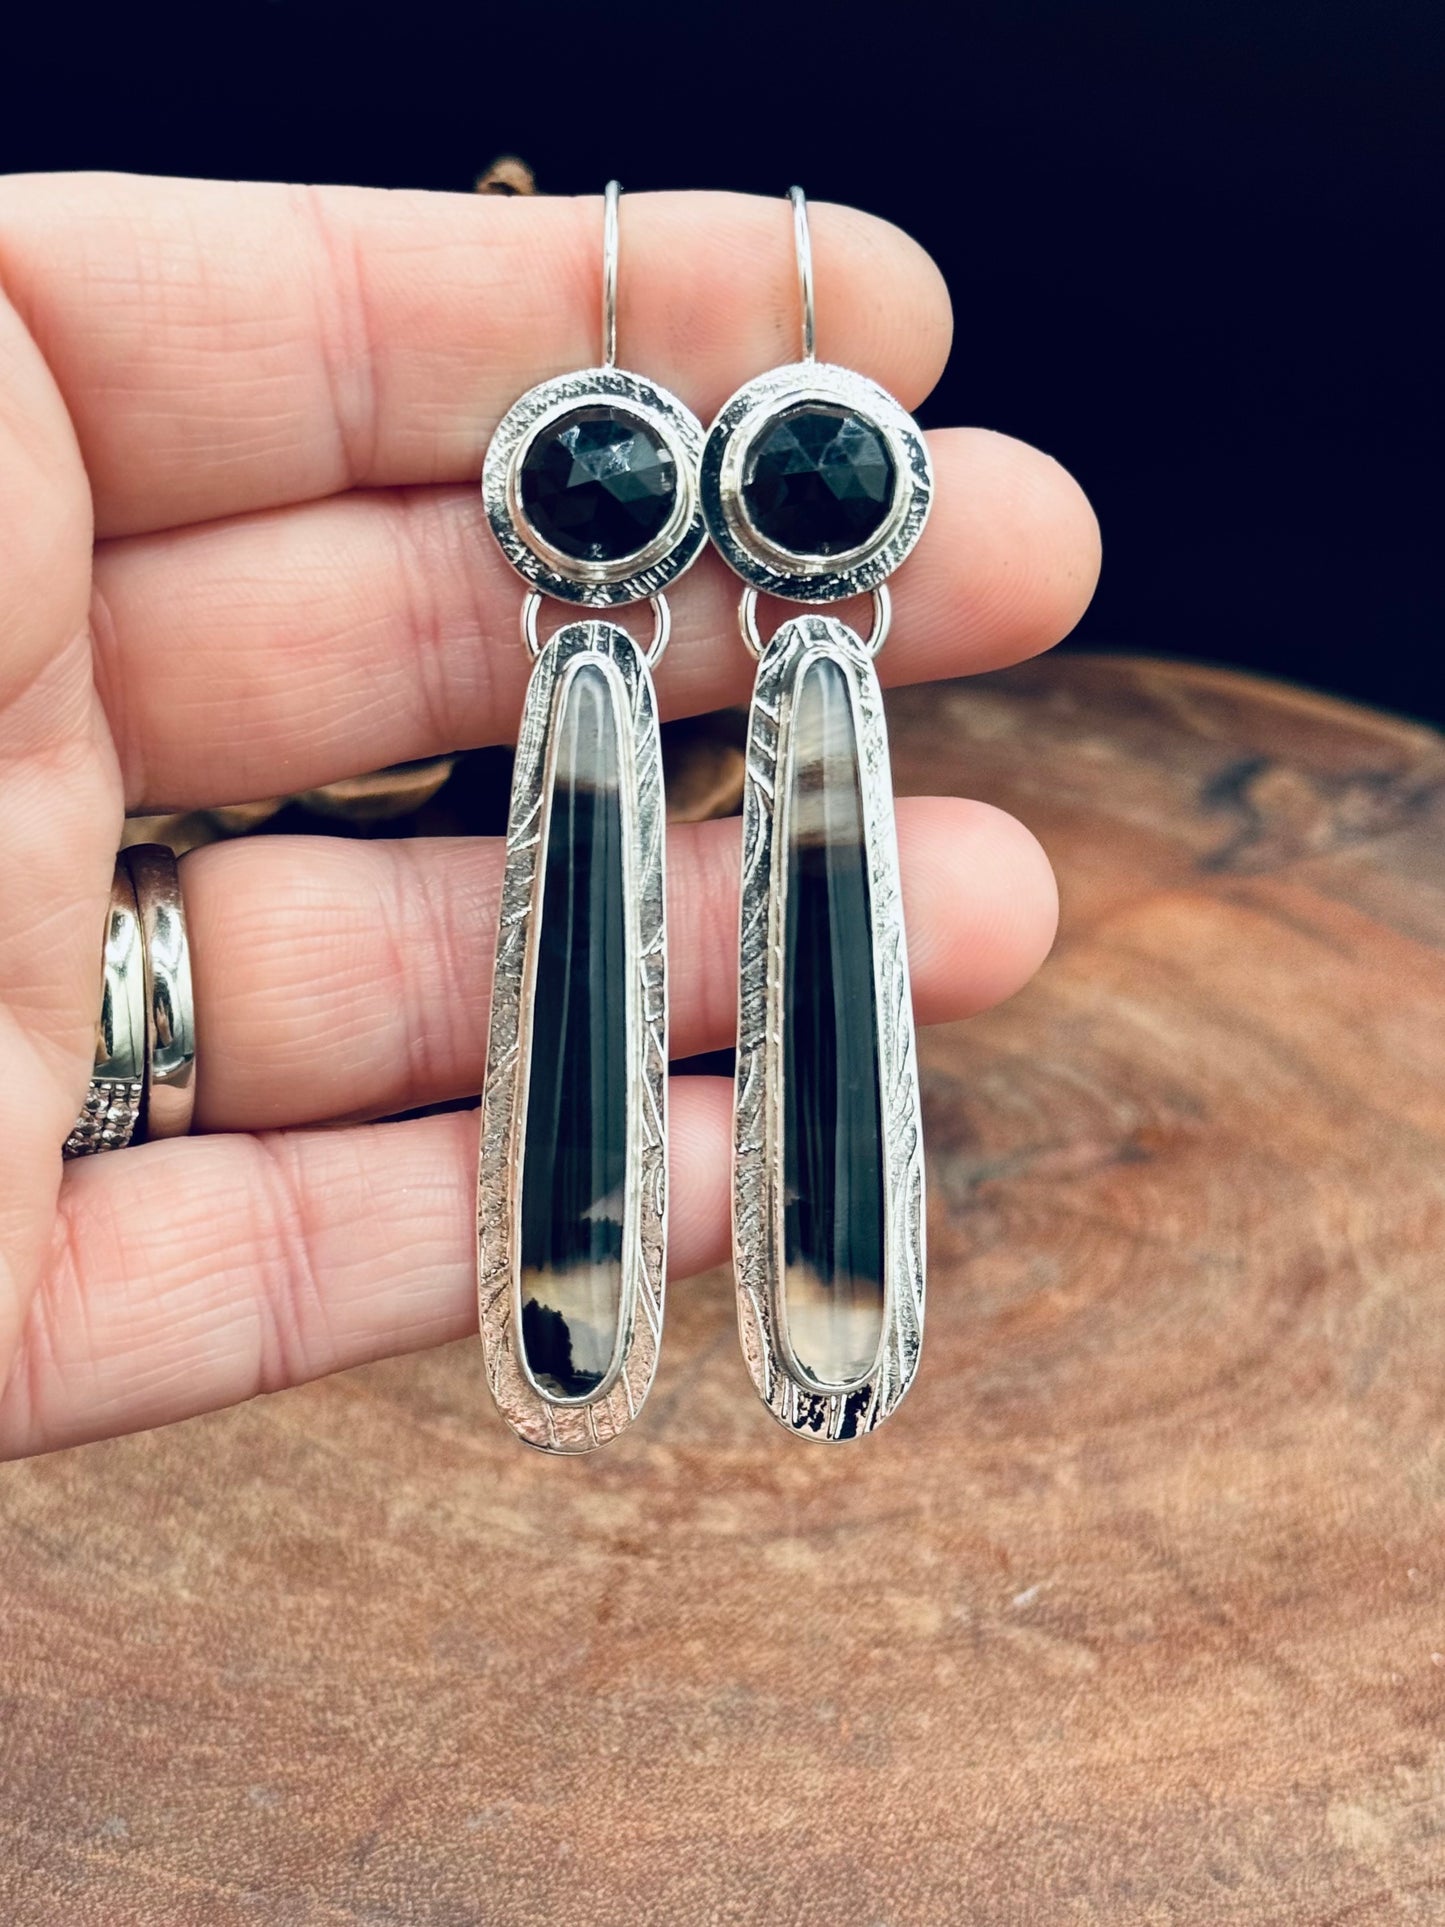 Montana Agate and Black Onyx Sterling Silver Patterned Earrings